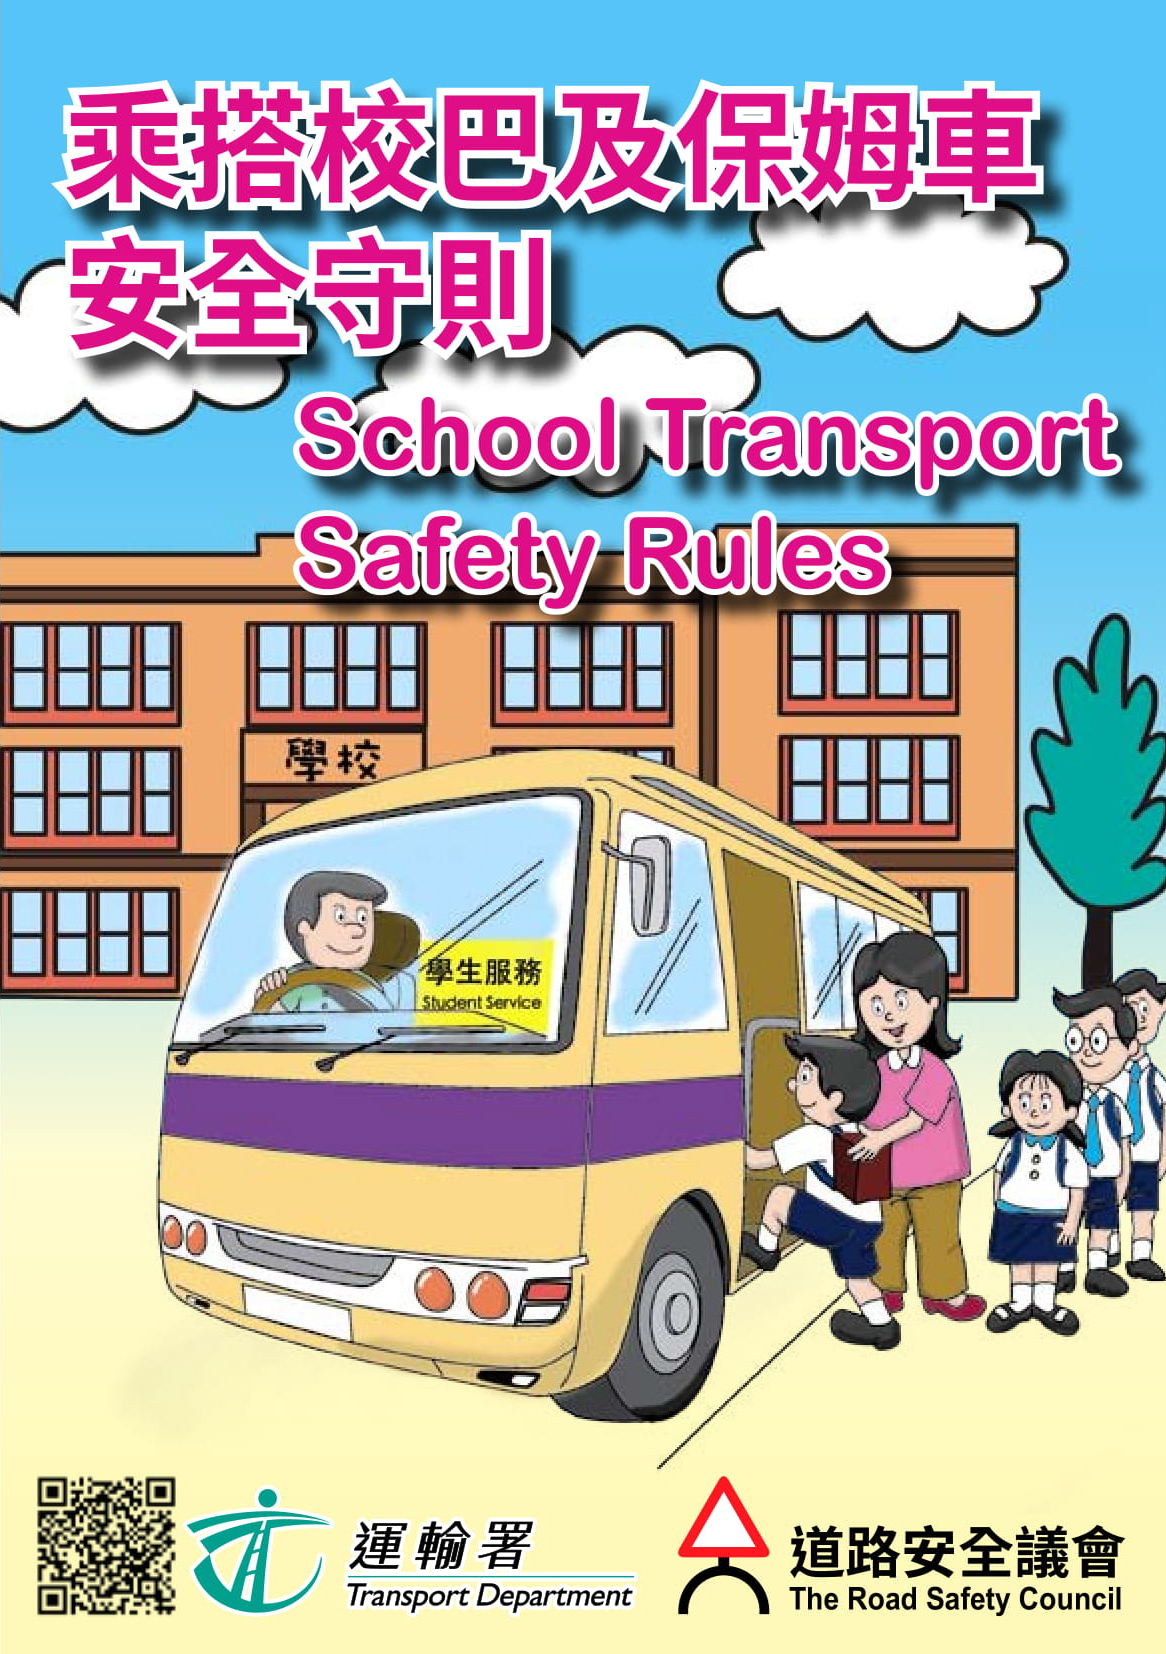 School Transport Safety Rules